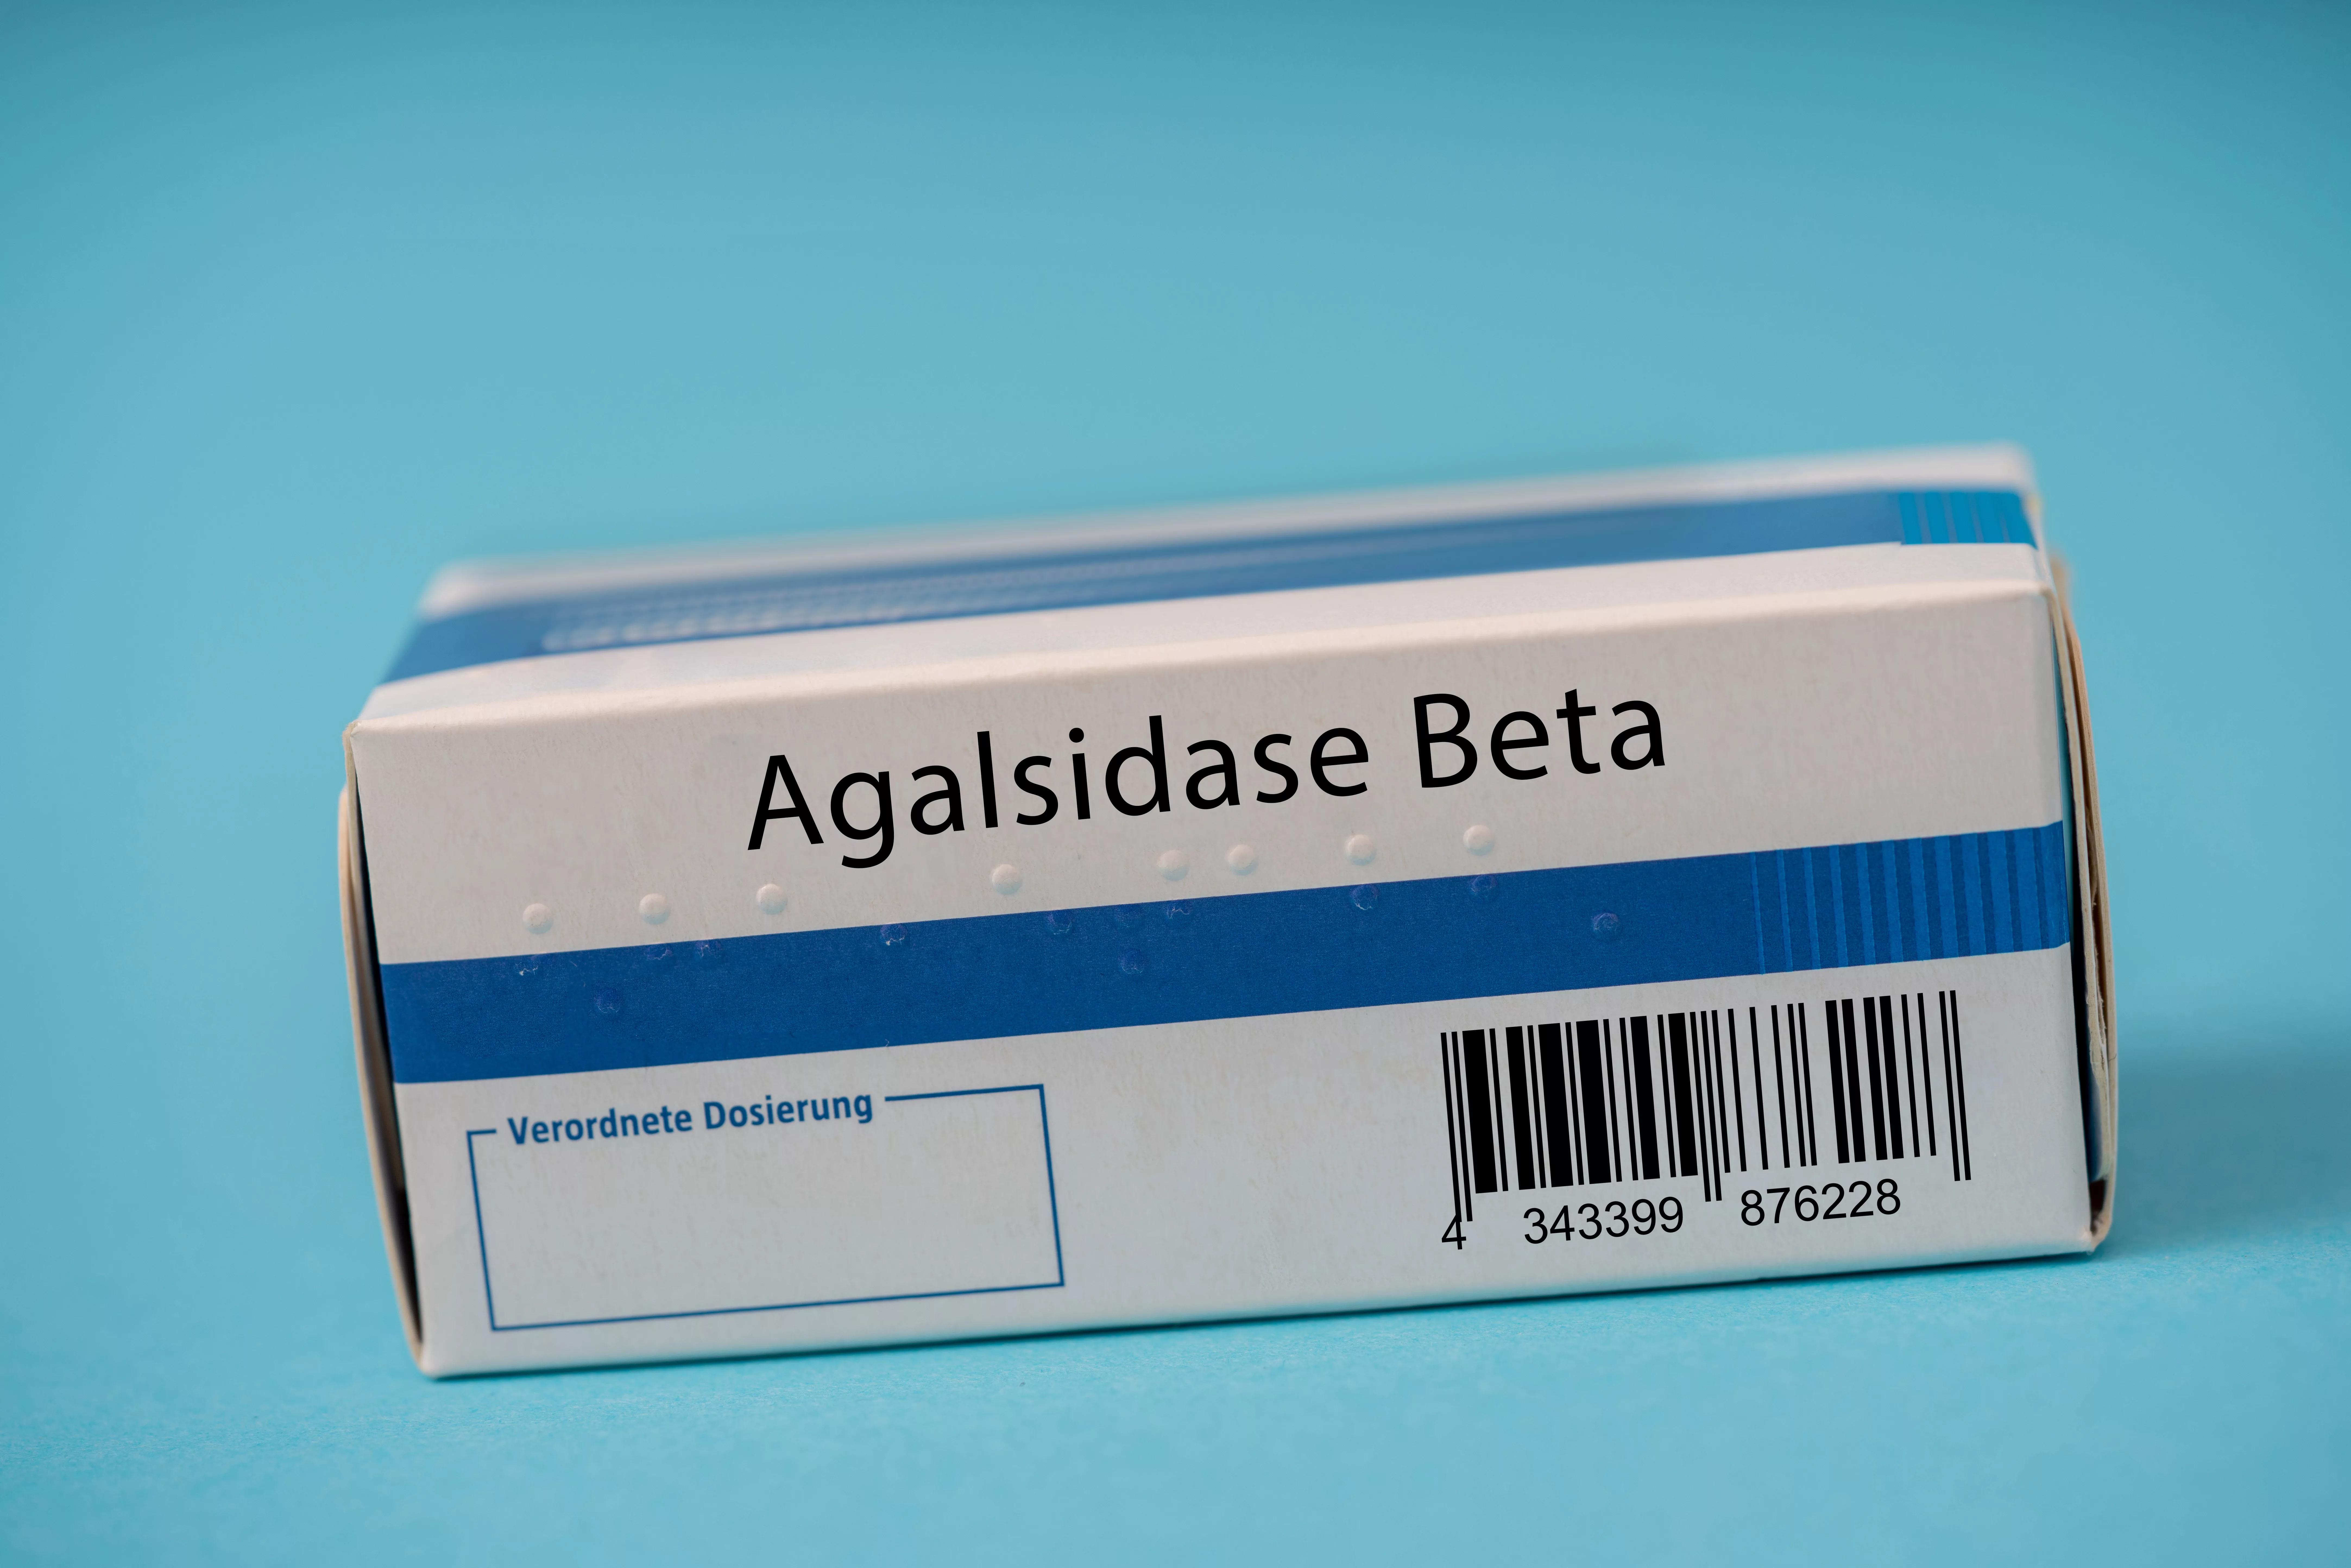 Agalsidase Beta, Enzyme replacement therapy (ERT) for Fabry disease